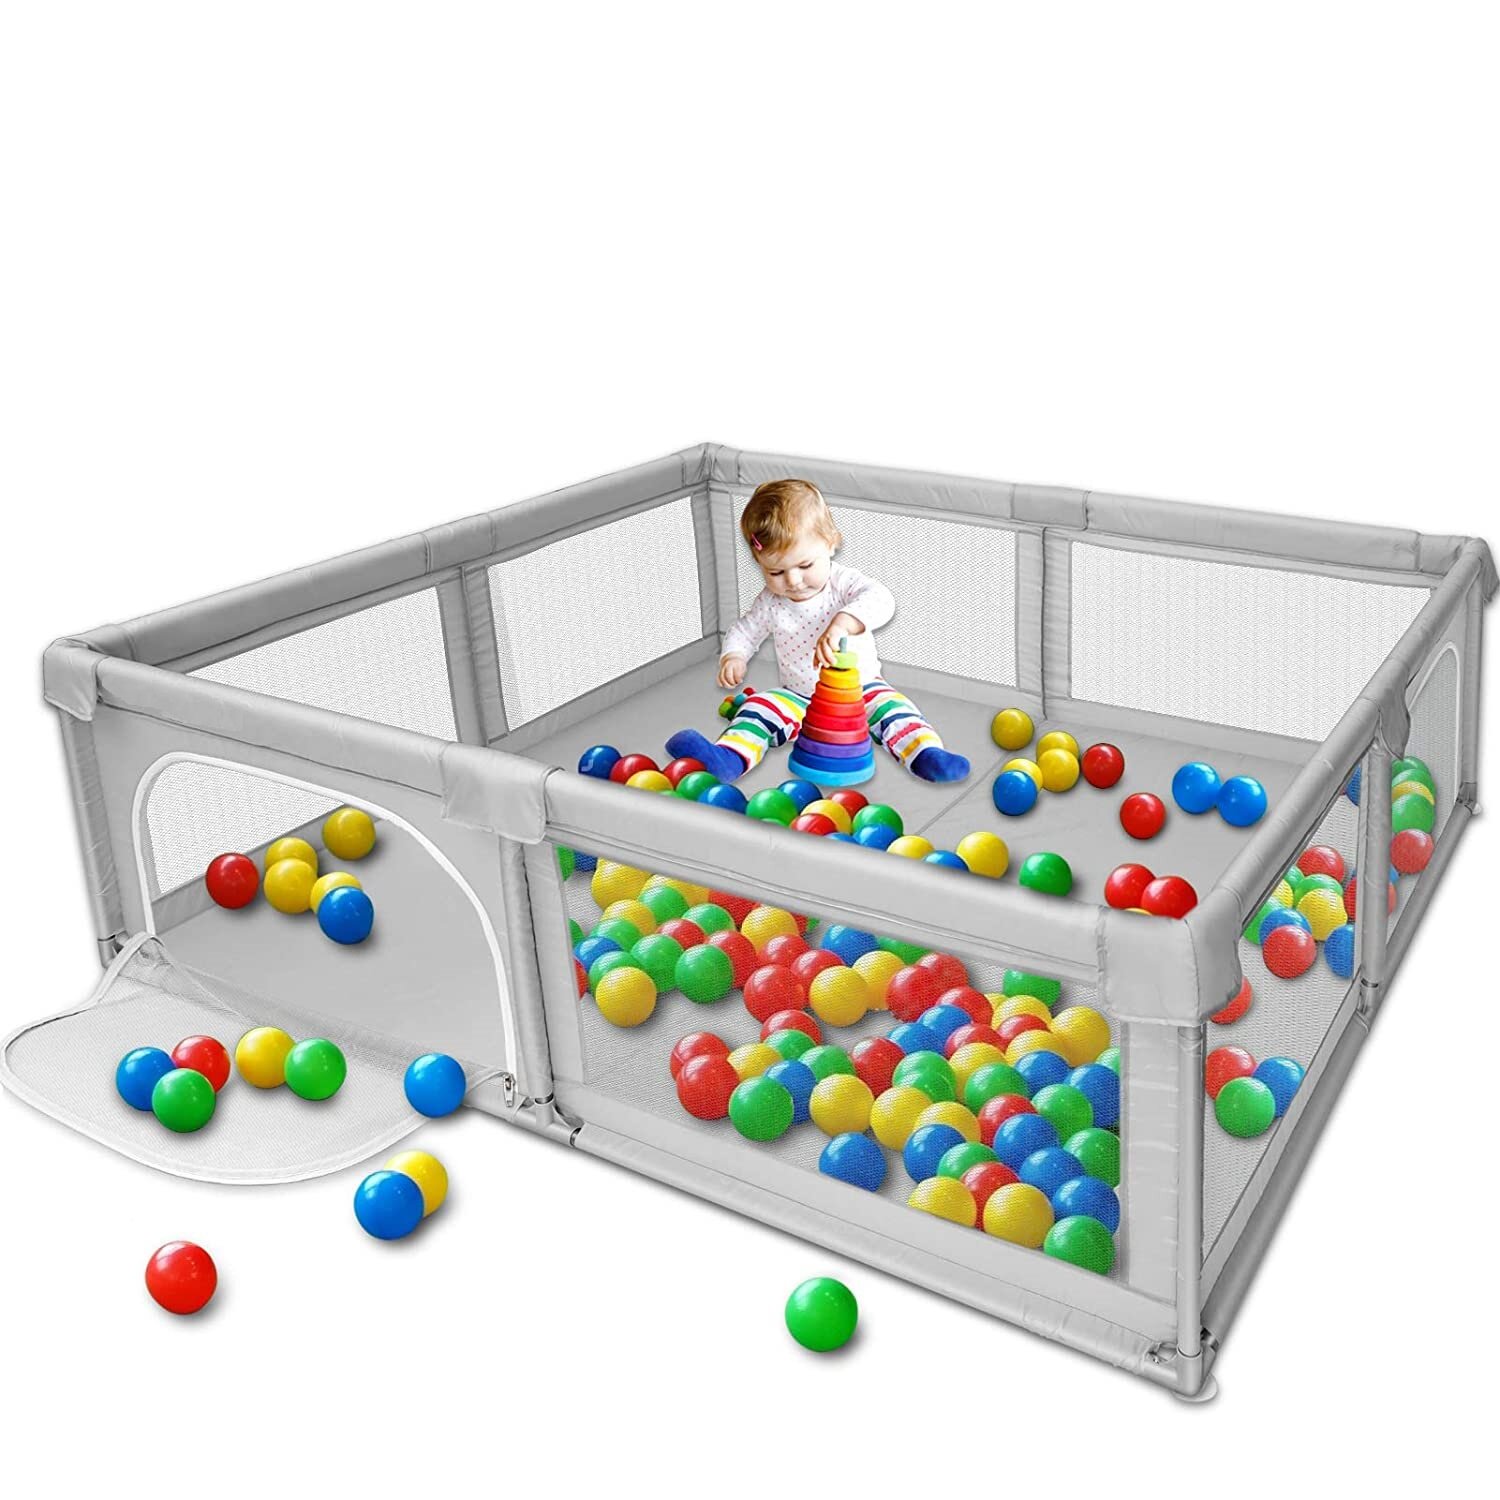 Image of 79'' Baby Playpen Infants Toddler Safety Kids Packable & Portable Play Pens Activity Play Yard +Gate for Babies and Todd